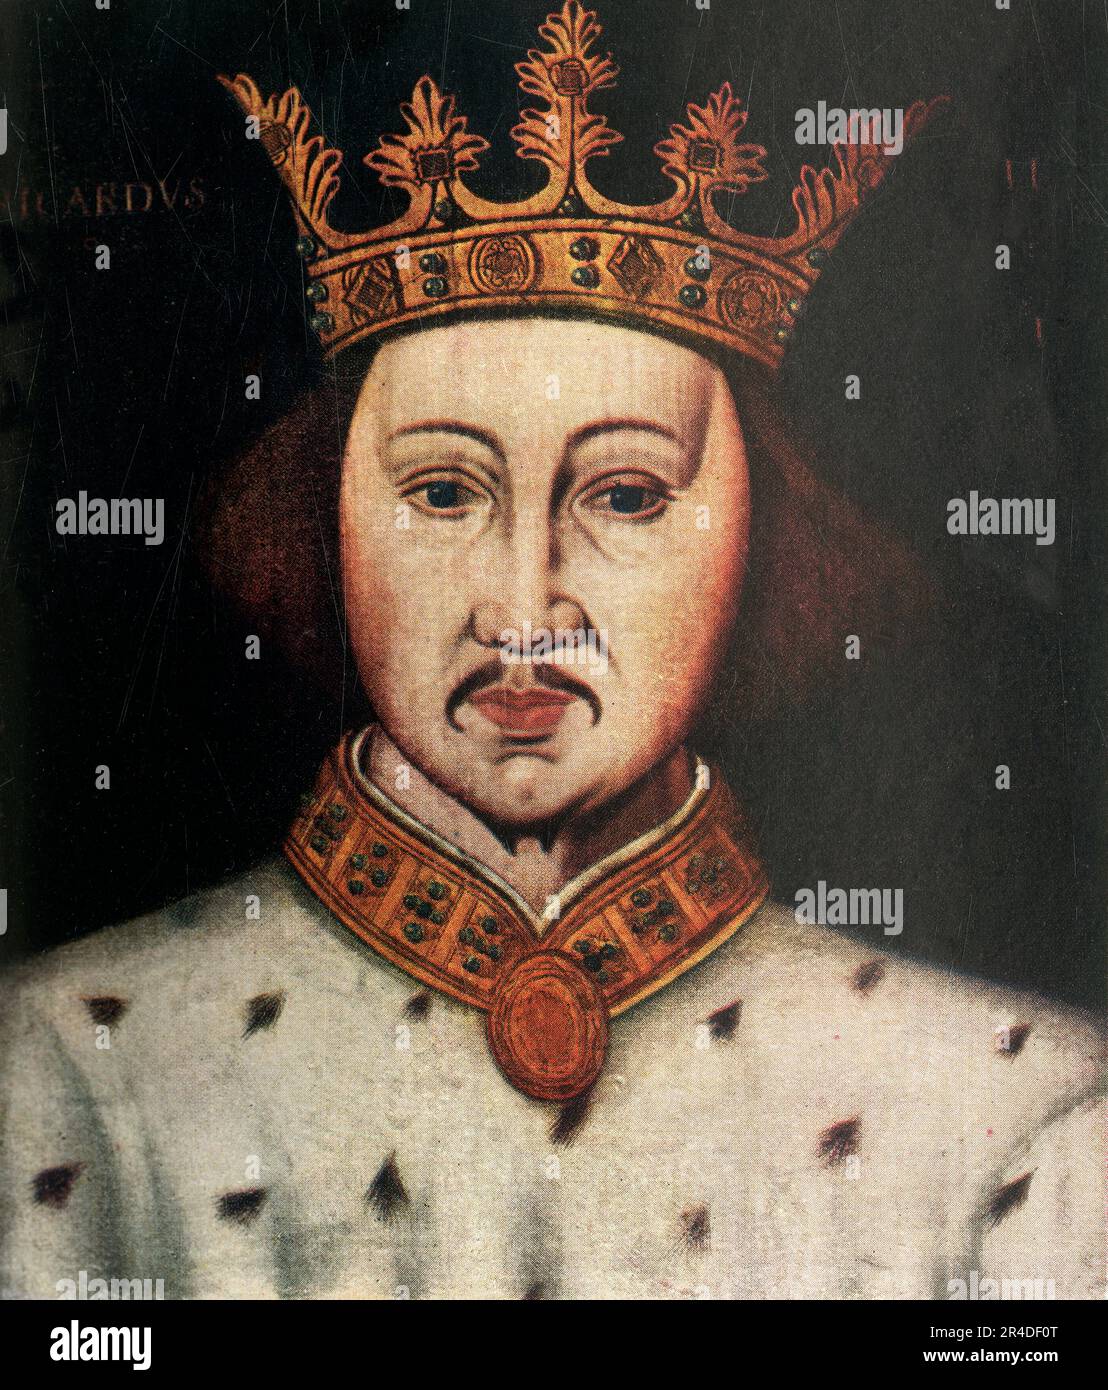 'Richard II', (c1911). King Richard II of England. 'From a painting in the National Portrait Gallery'. Published in &quot;The Portrait Book of Our Kings and Queens 1066-1911&quot;, edited by T. Leman Hare. [T. C. &amp; E. C. Jack, London &amp; Edinburgh] Stock Photo